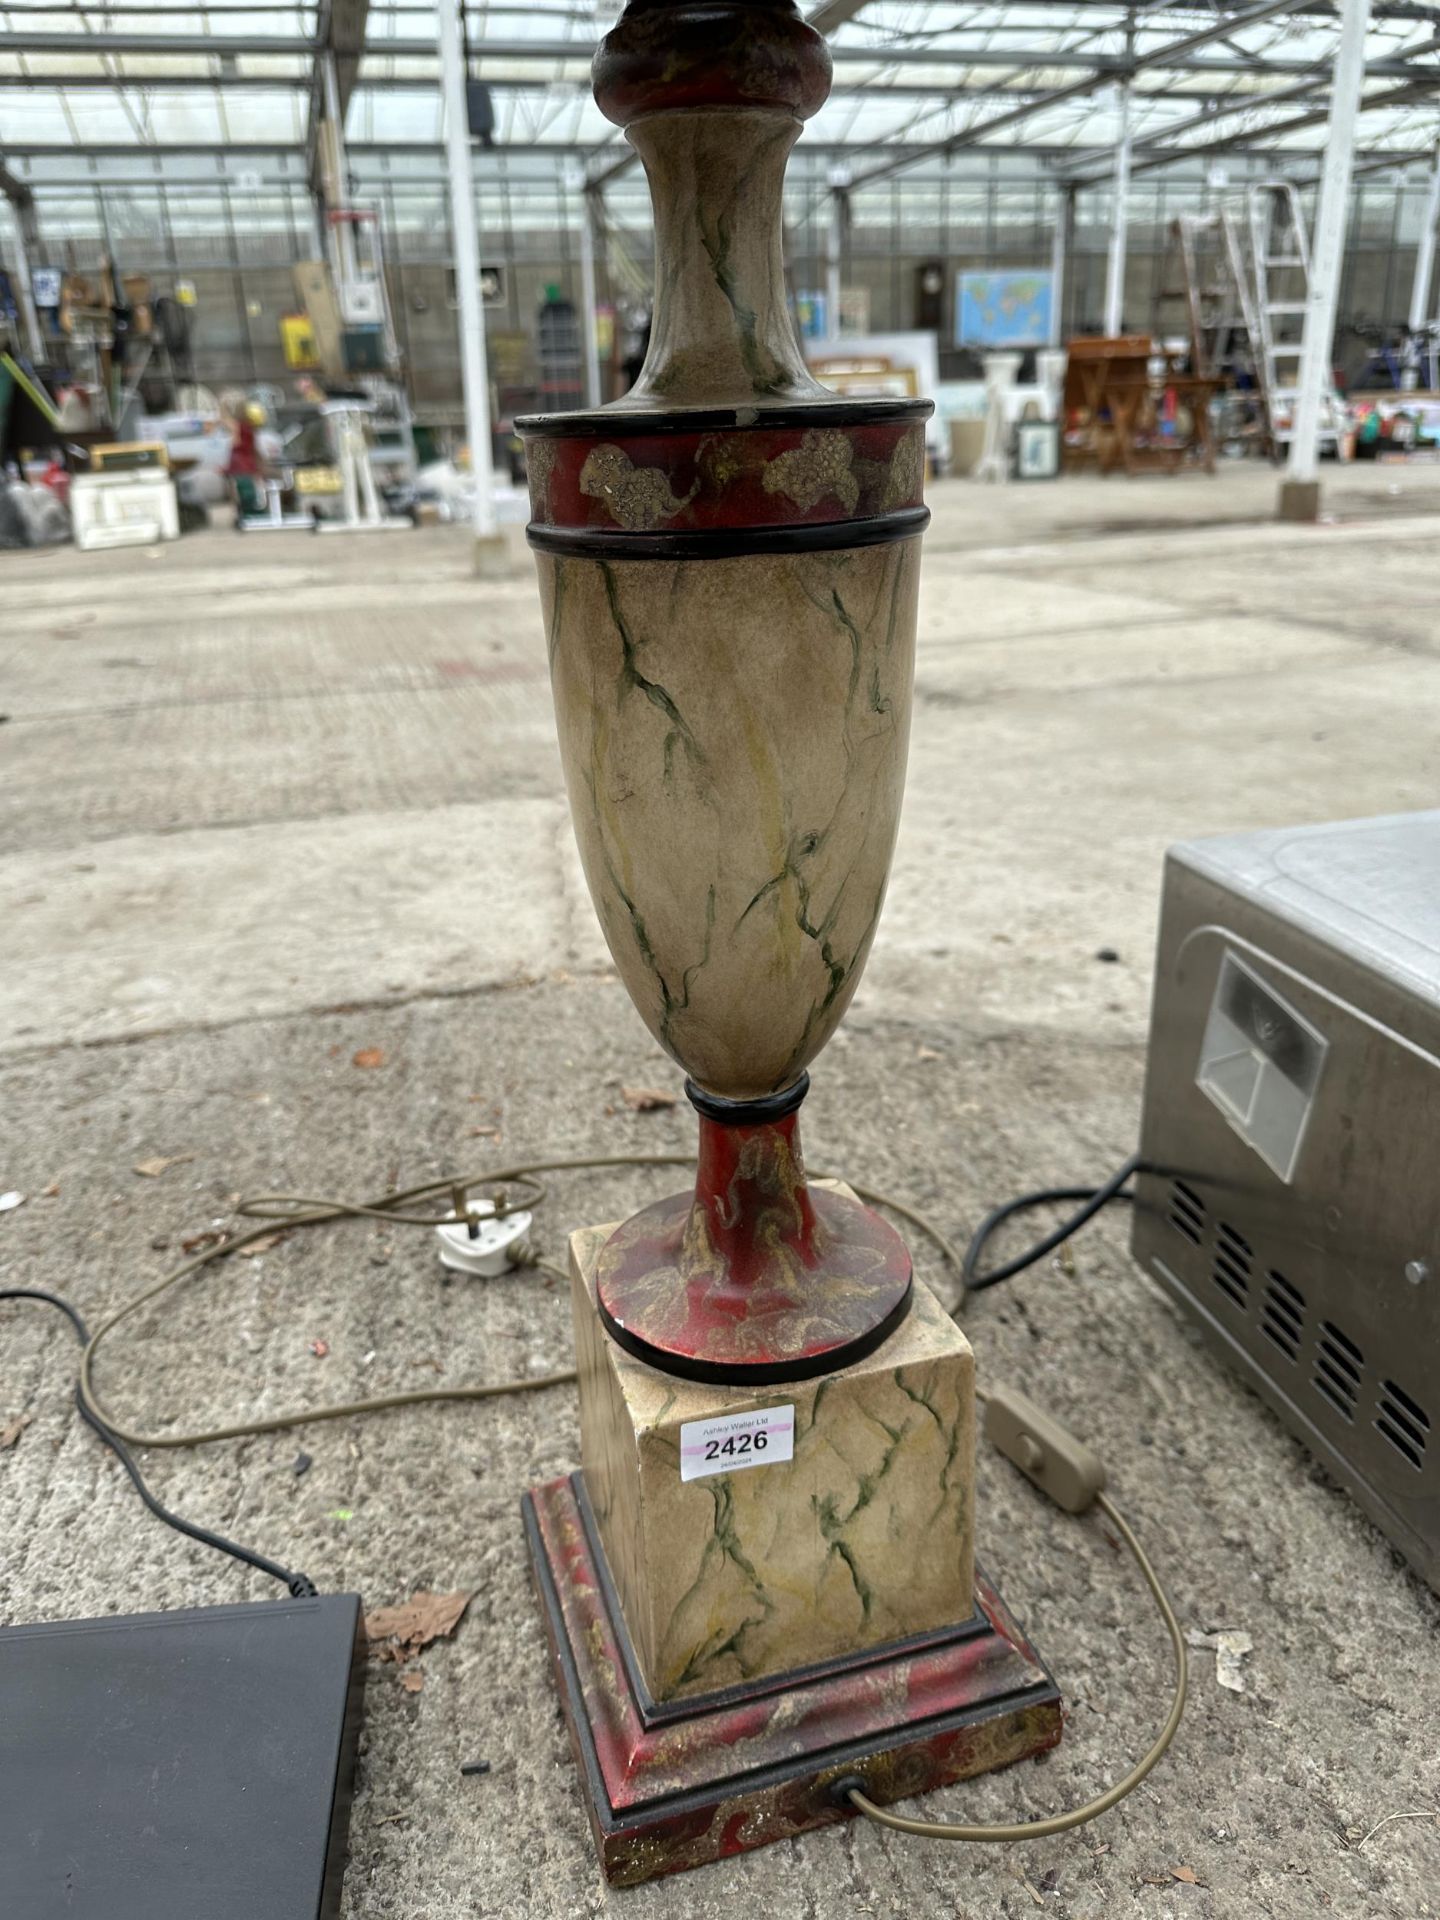 A LARGE ORNATE AND DECORATIVE TABLE LAMP WITH SHADE - Image 2 of 2